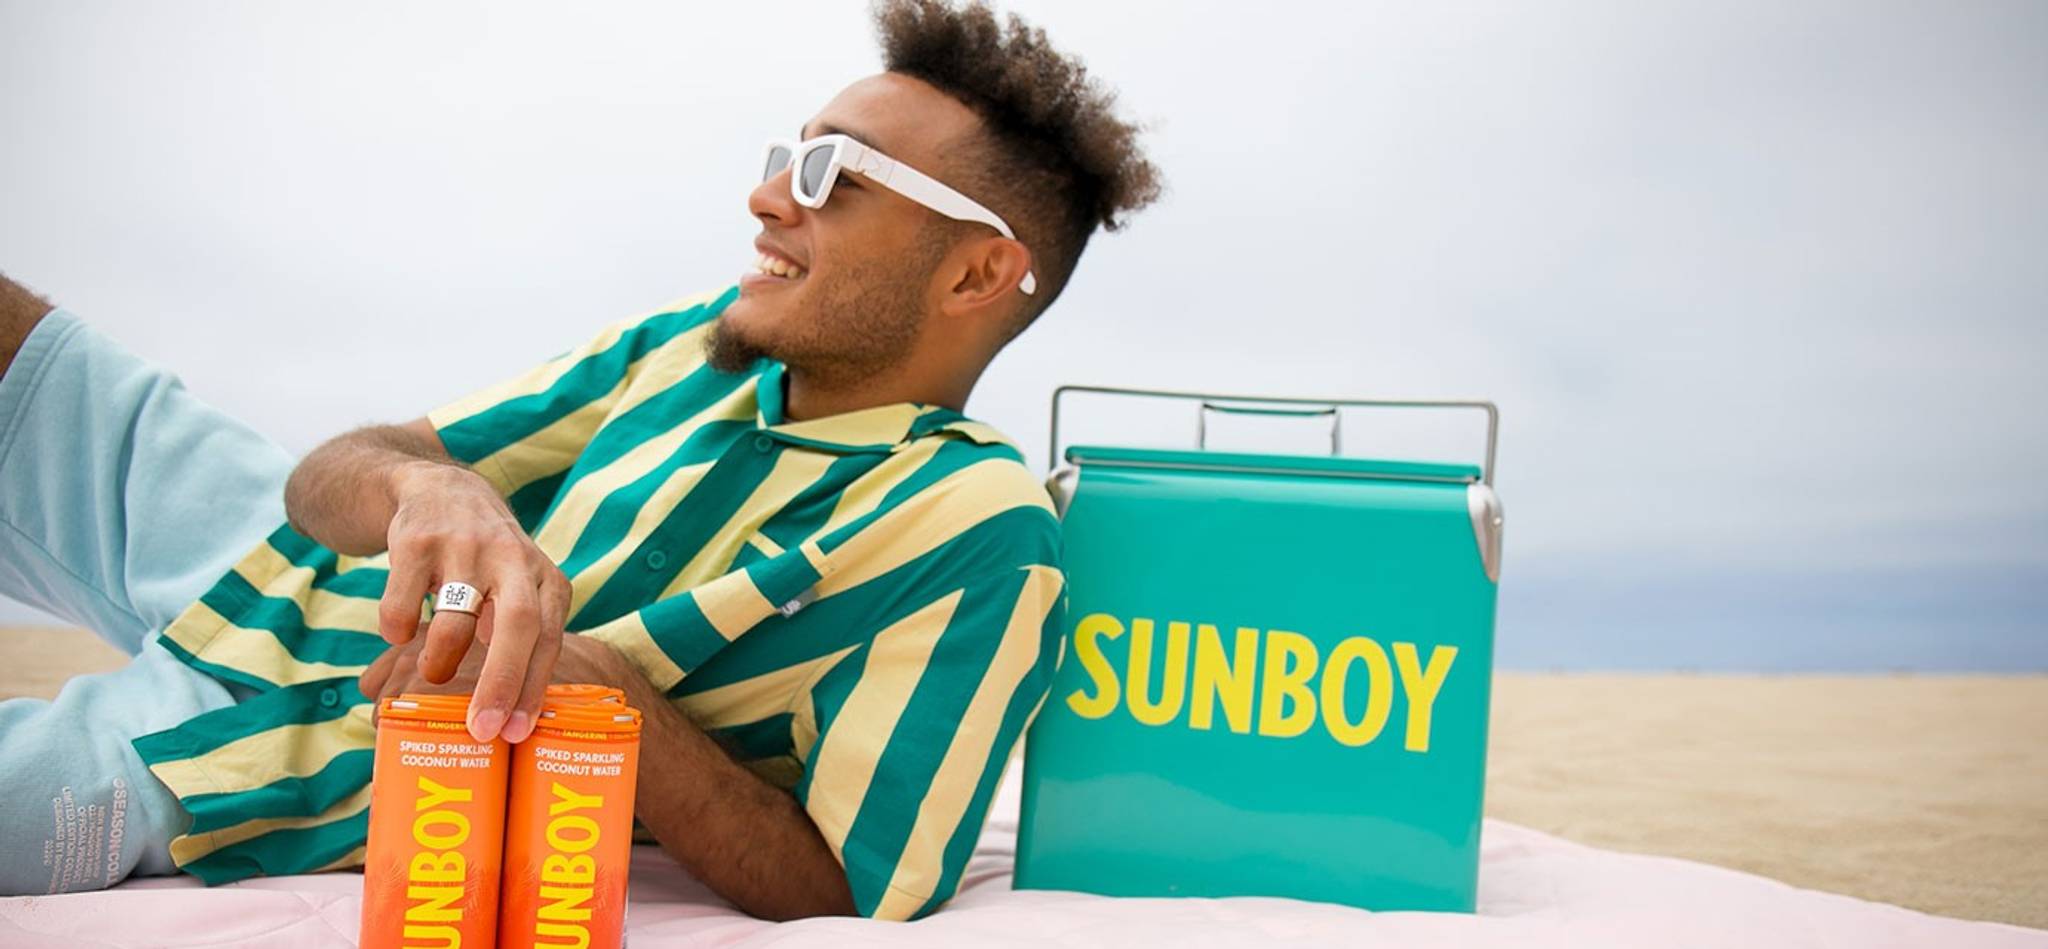 Sunboy: functional cocktails with a Caribbean twist